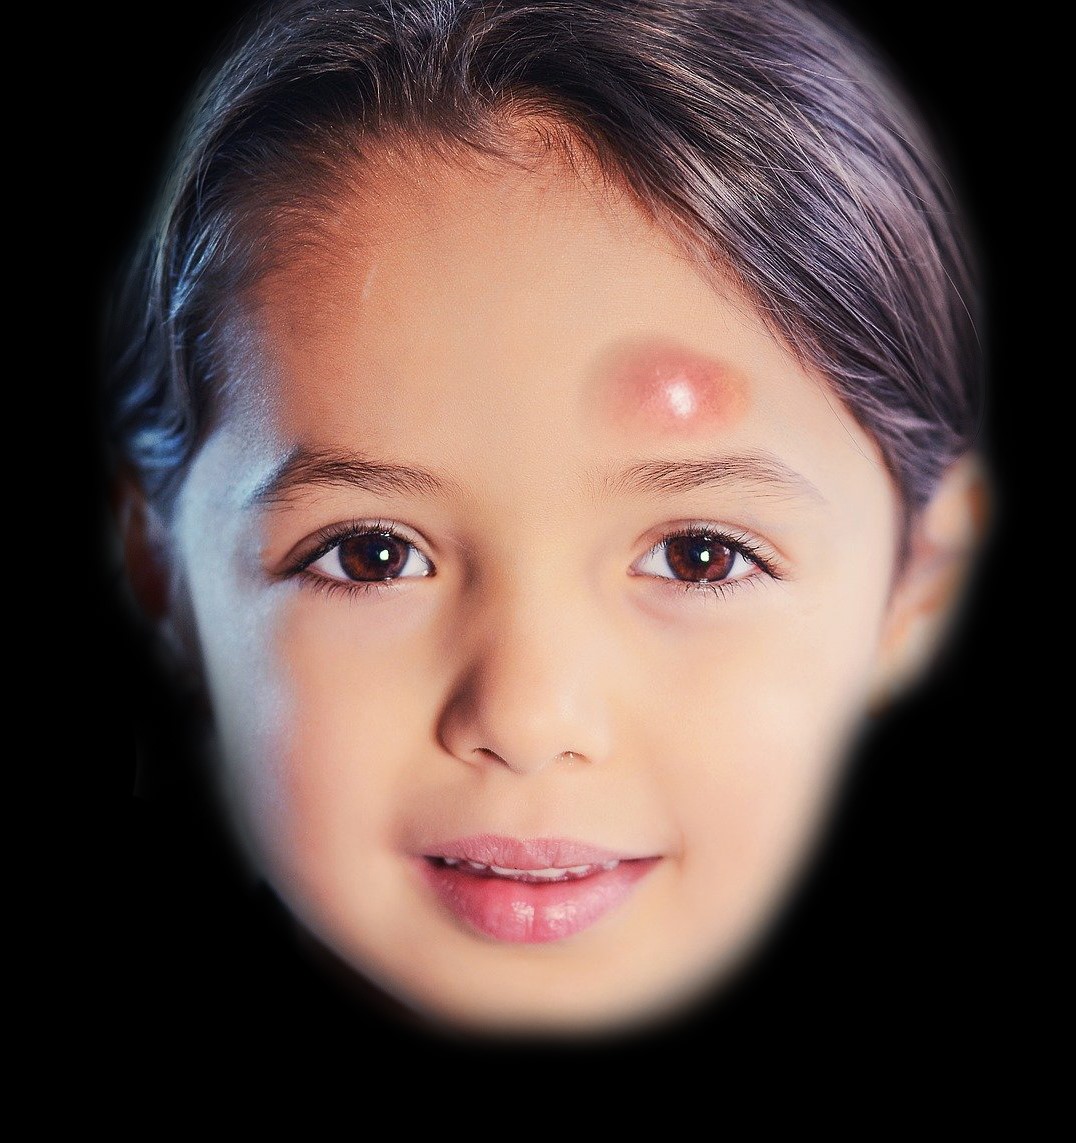 Example of a pott puffy tumor.